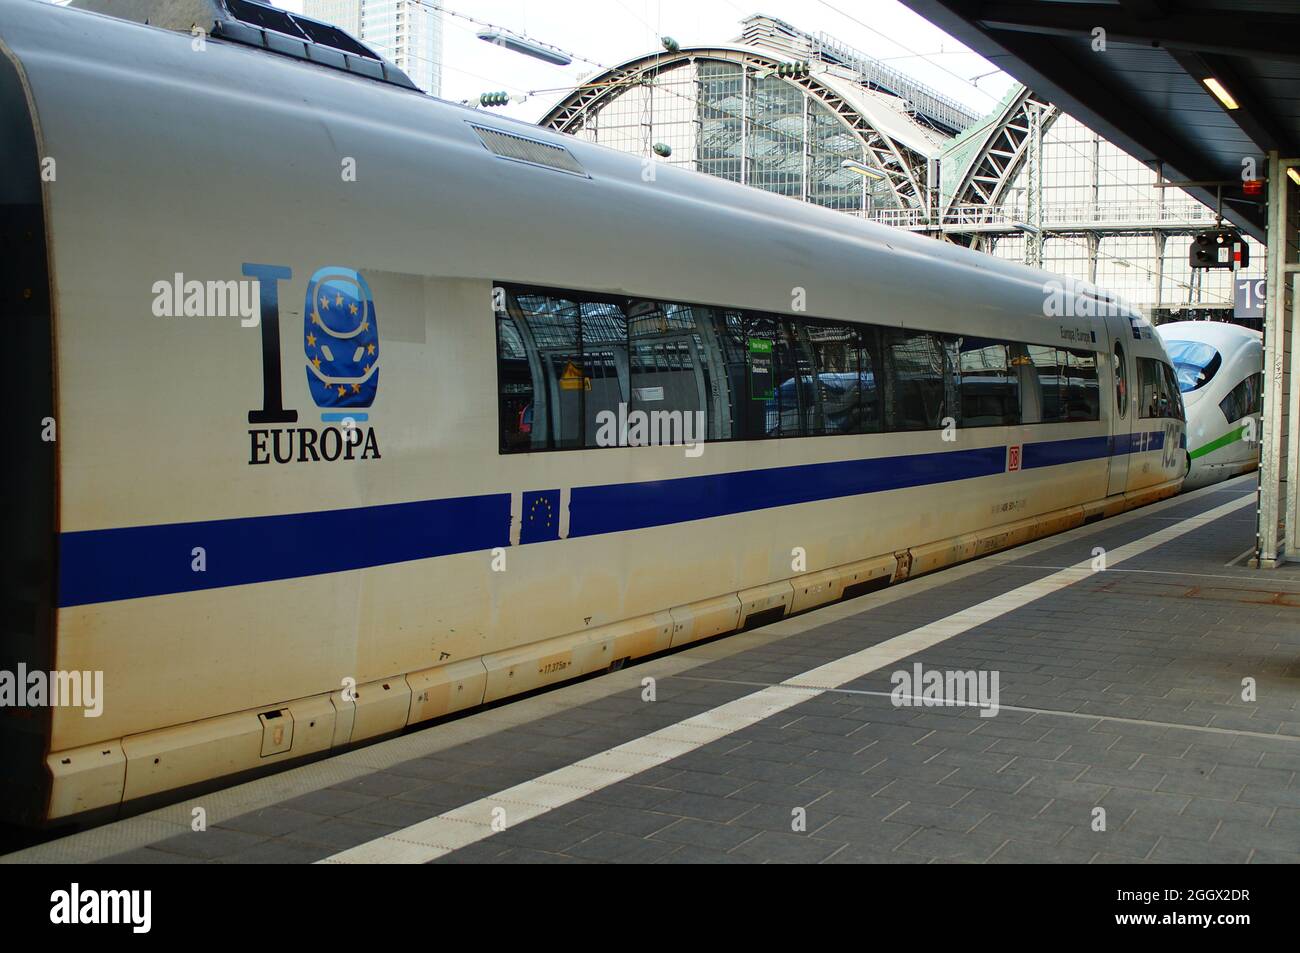 FRANKFURT, GERMANY - Aug 31, 2021: Head of an ICE 3, named 'Europa', in European livery with blue stripe coupled with a classic one in Frankfurt Centr Stock Photo